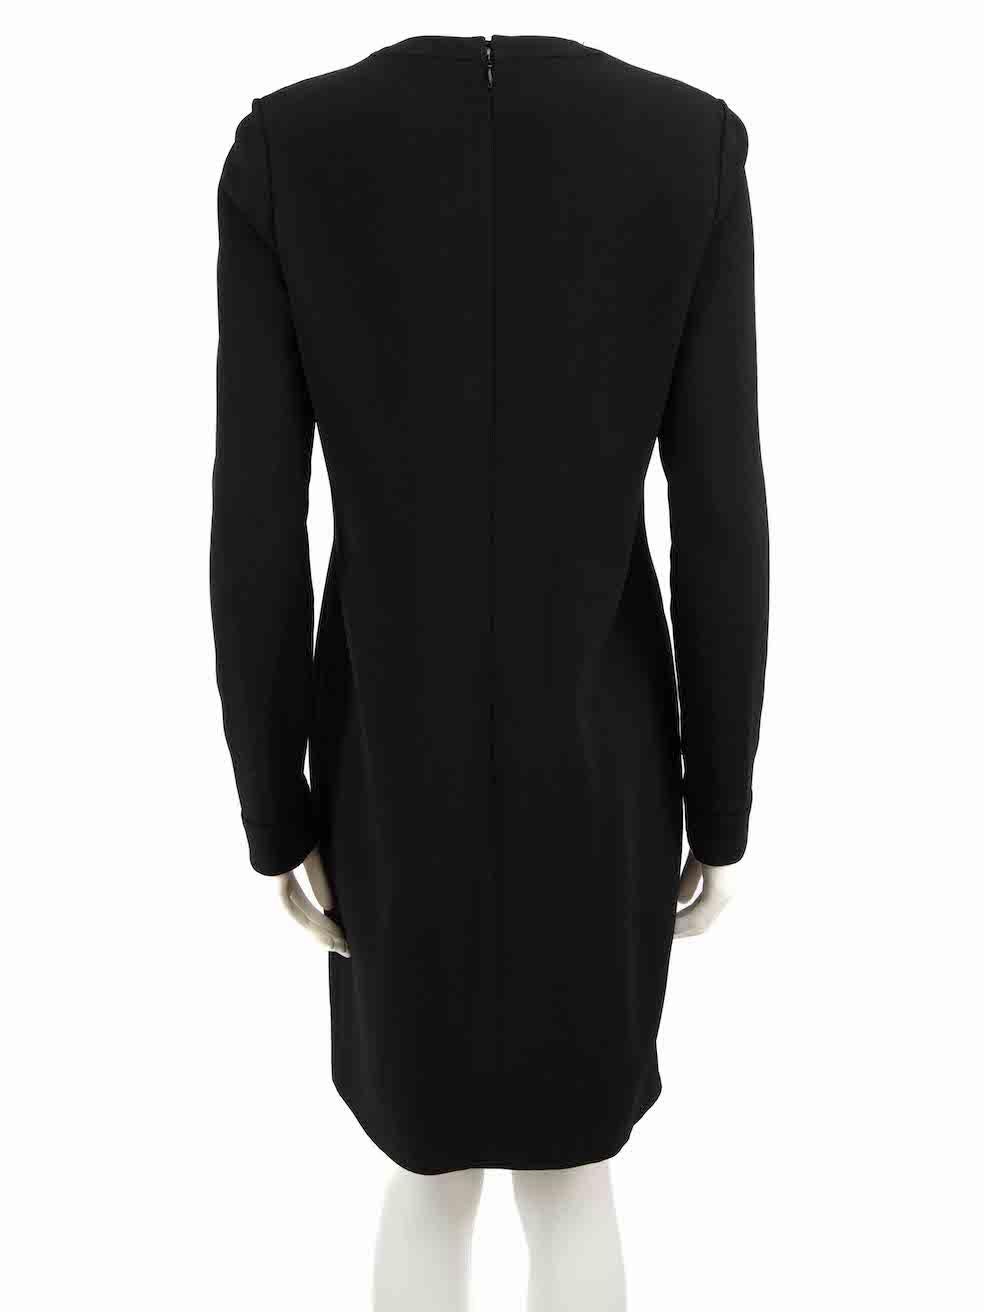 Tom Ford Black Laced Neck Long Sleeve Dress Size M In Excellent Condition For Sale In London, GB